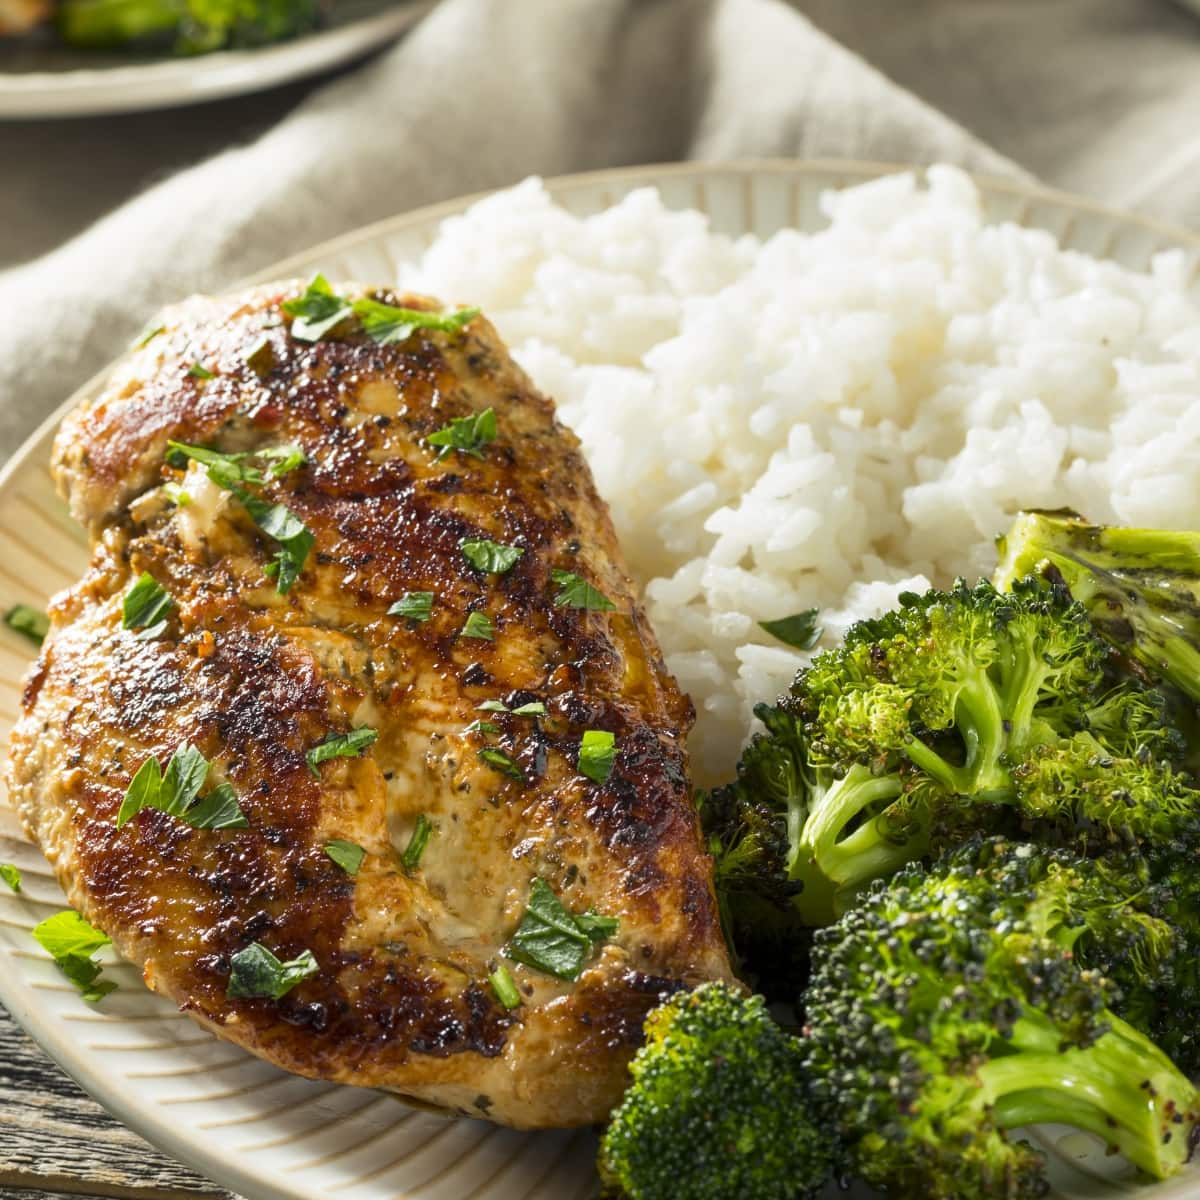 Healthy Homemade Baked Chicken Breast with Rice and Broccoli